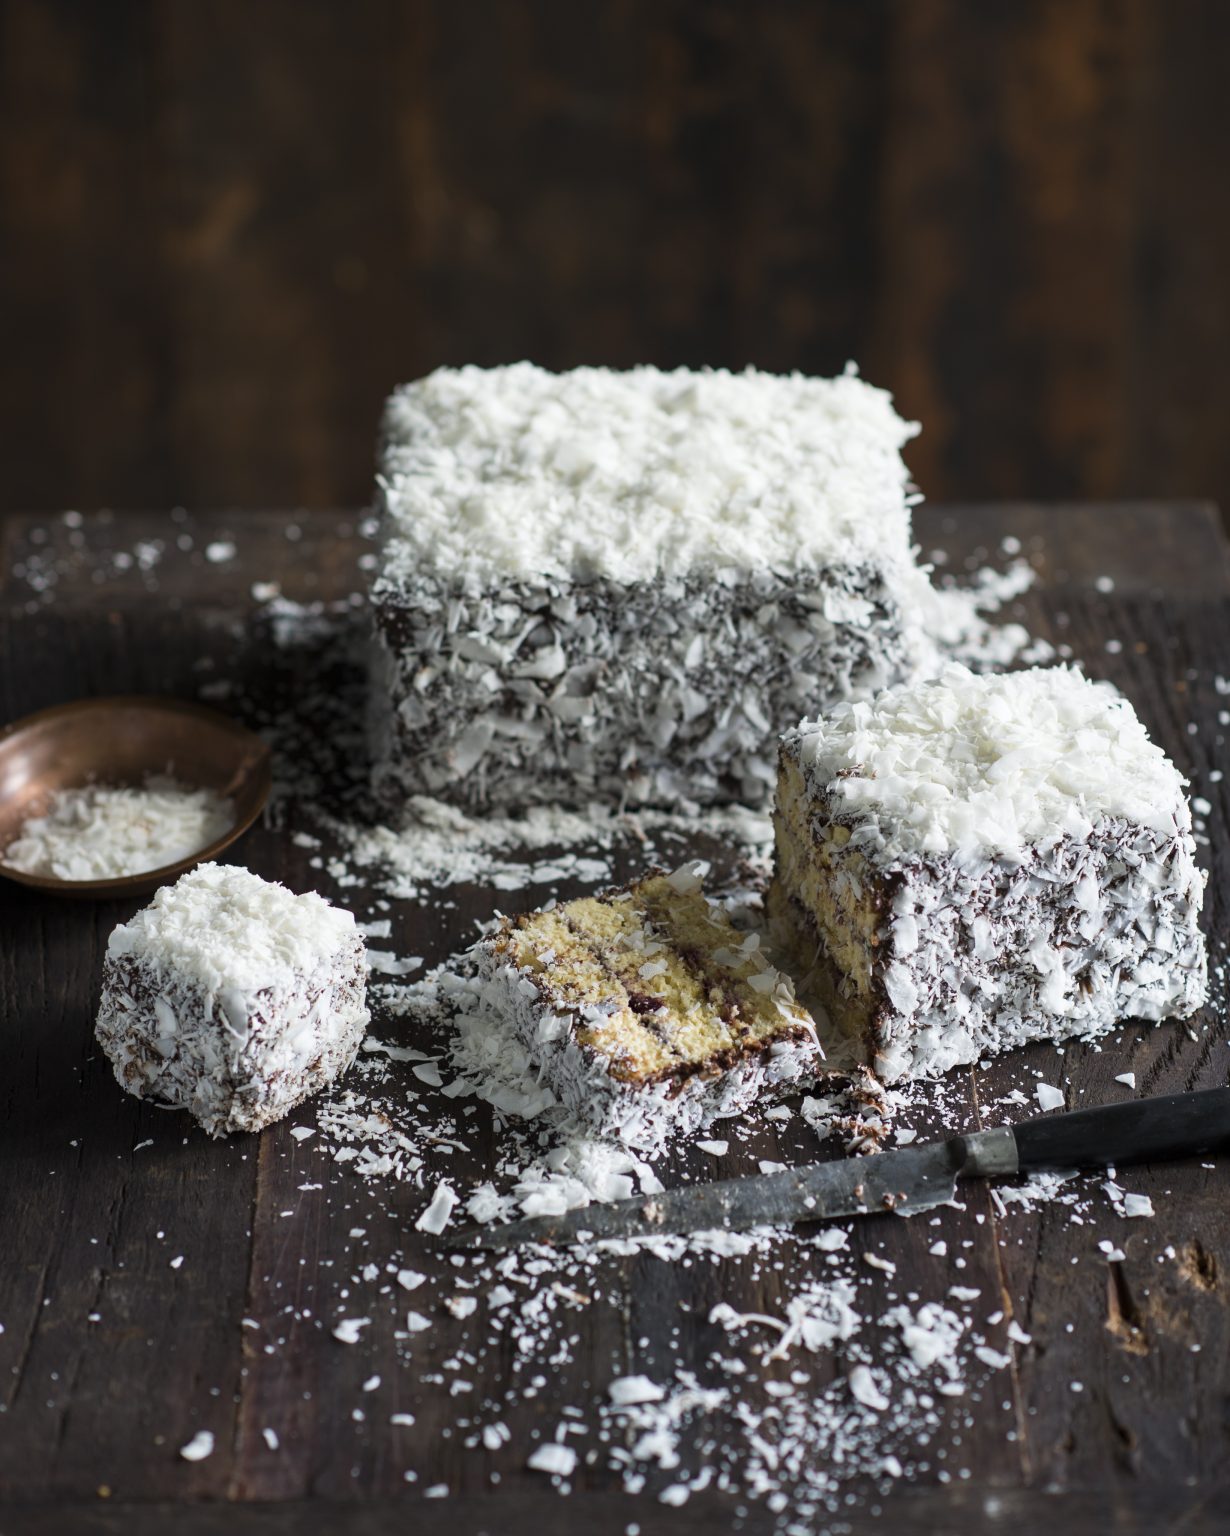 Traditional Australian lamington, coated in chocolate icing and shredded coconut, with a moist sponge interior